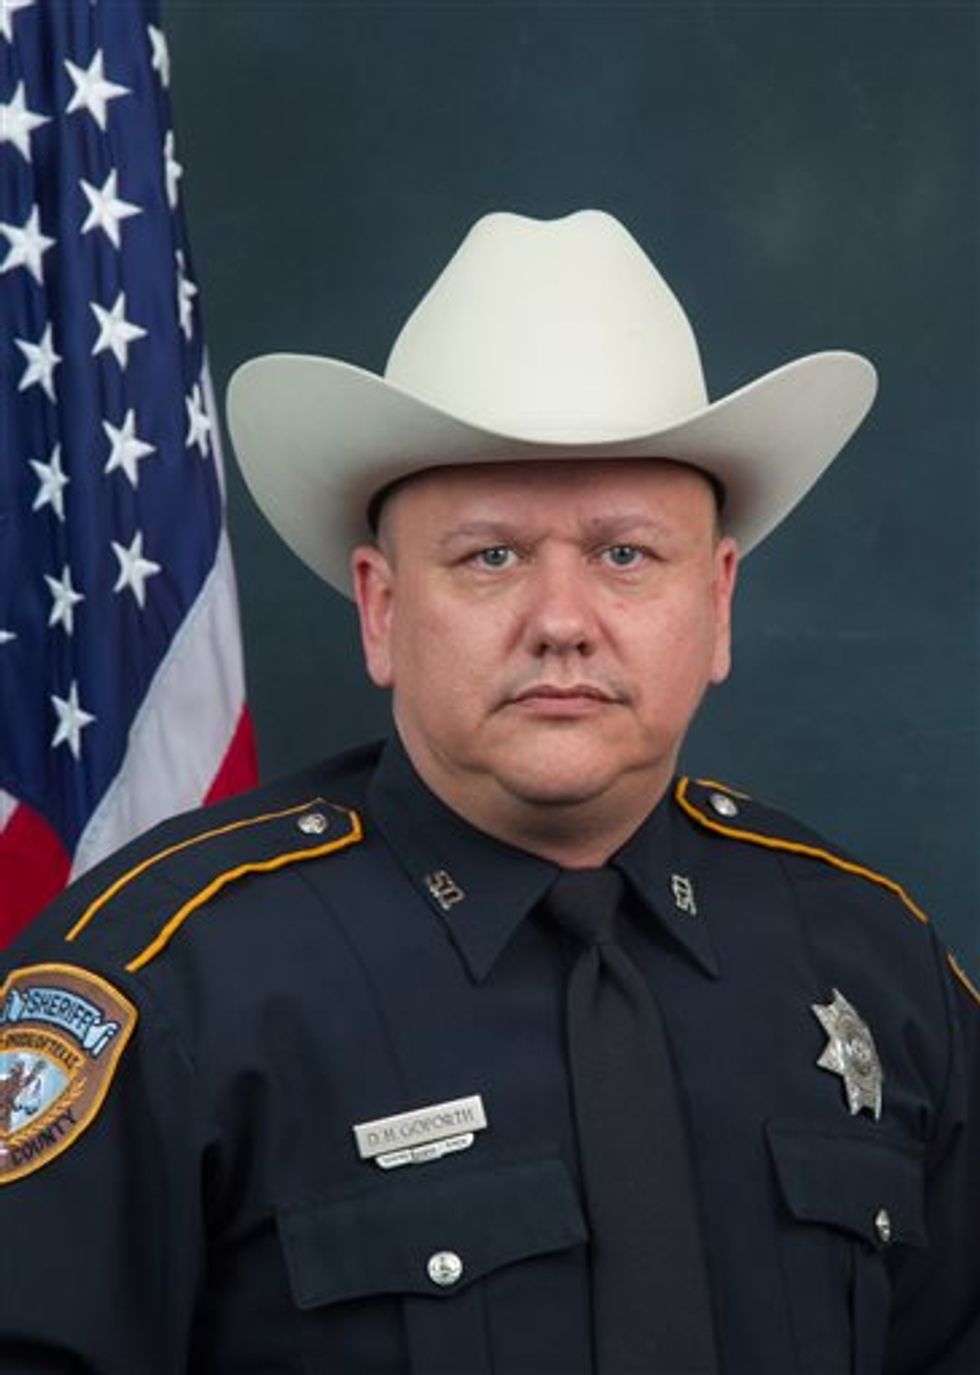 Here’s How Much Has Been Raised to Support Family of Slain Texas Deputy Darren Goforth